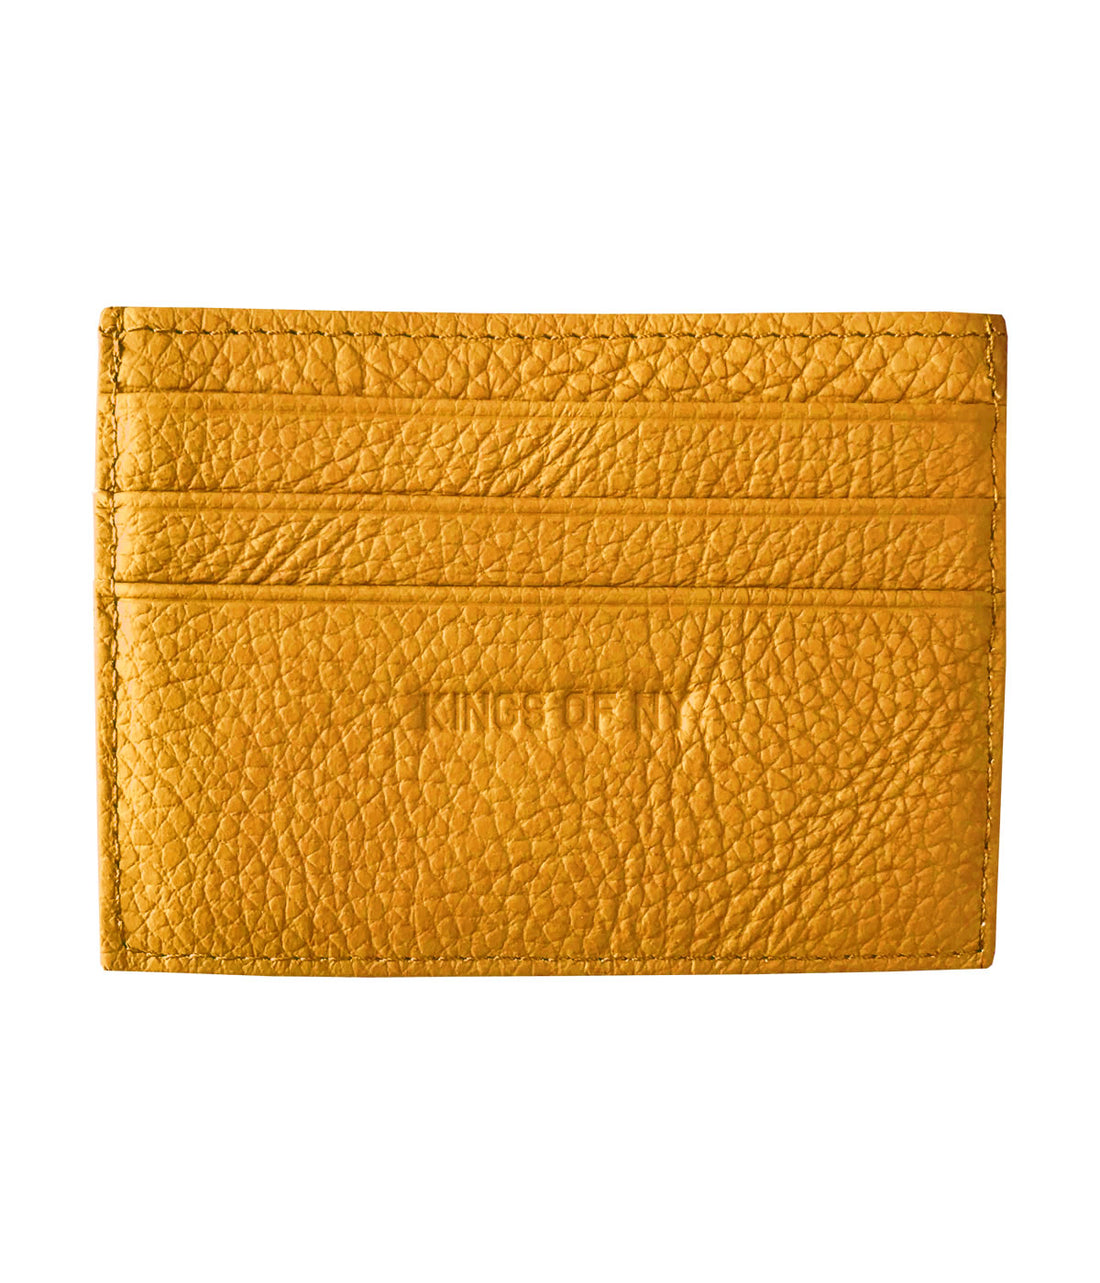 Kings Of NY Pebble Leather Card Holder Wallet Mustard Yellow